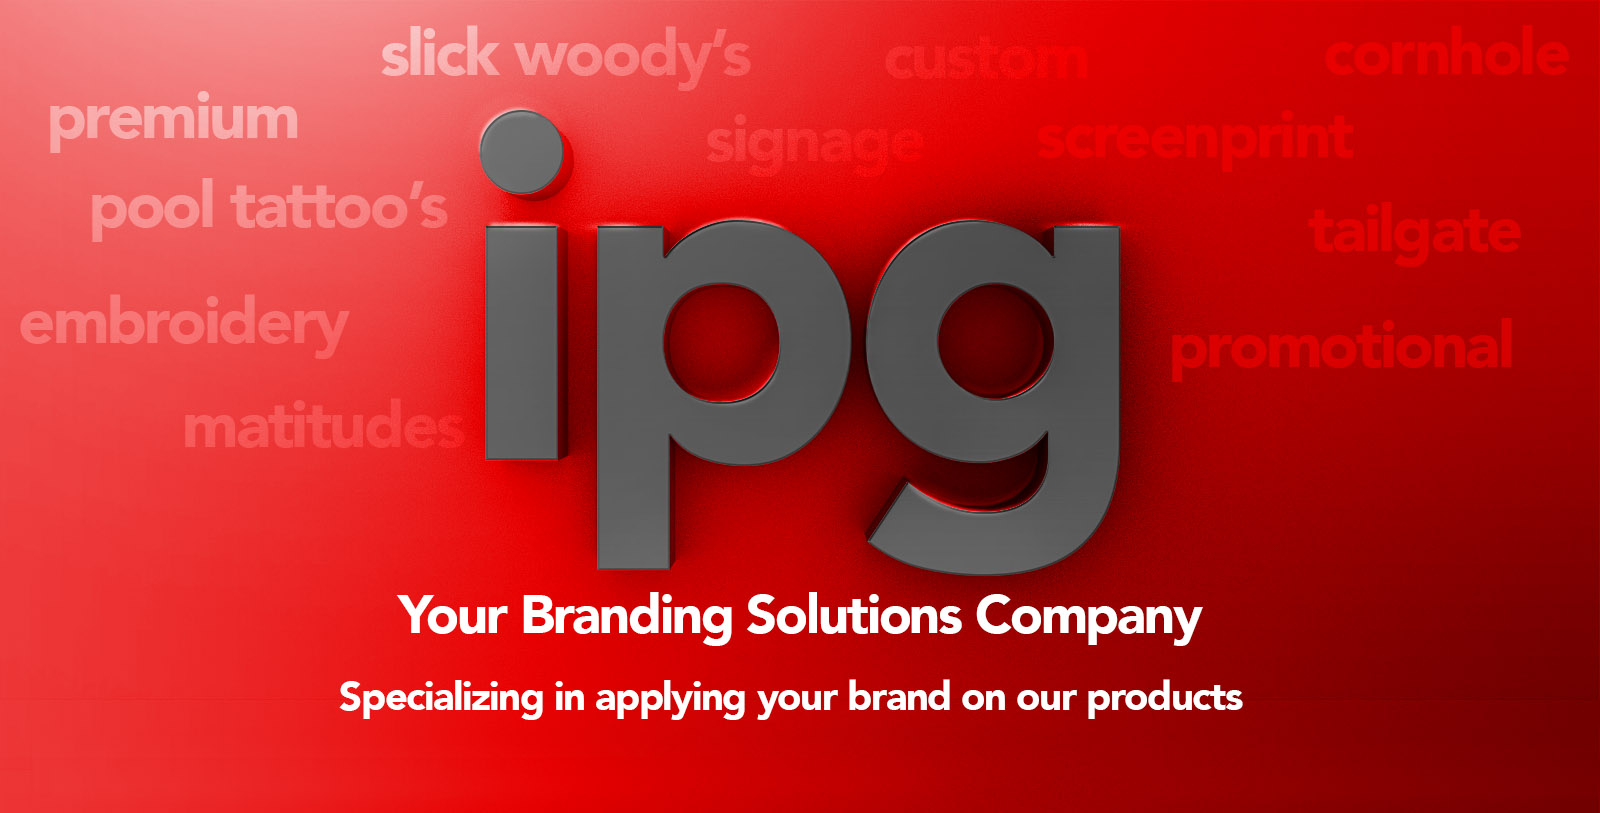 IPG Global Marketing provides all your promotional and branding needs